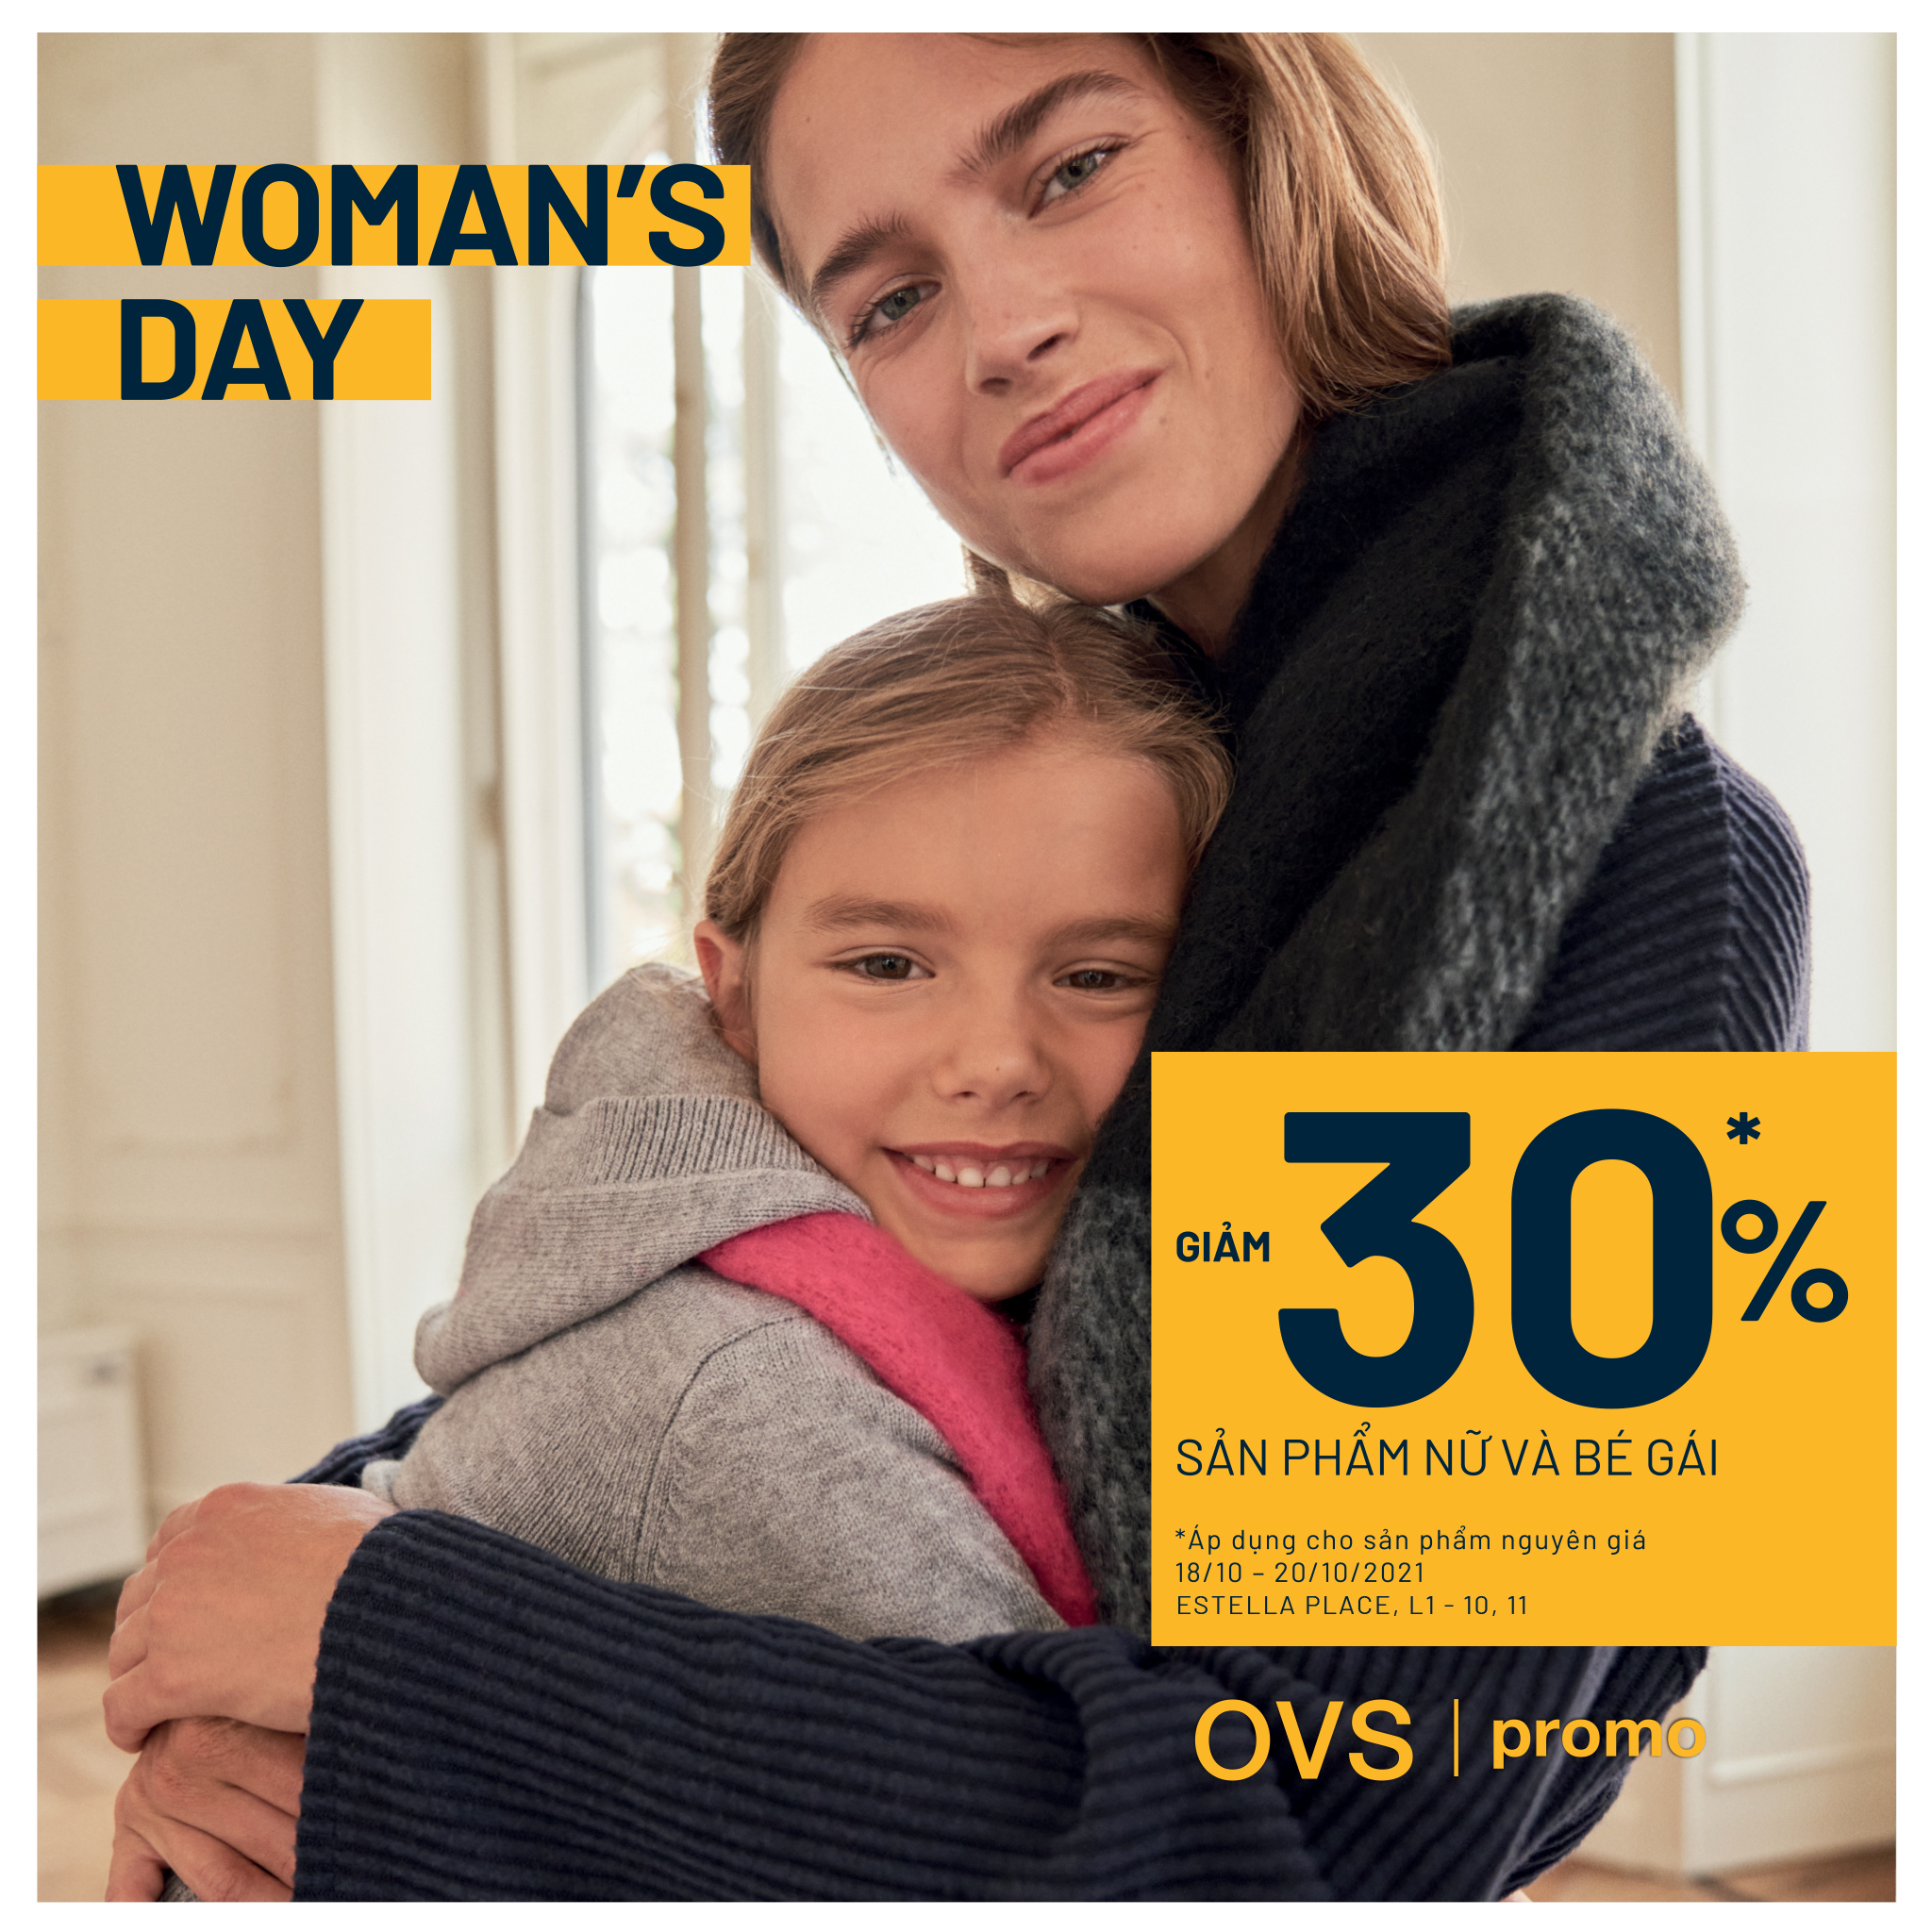 OVS 💐 HAPPY WOMEN'S DAY - 30% OFF for WOMEN AND KID GIRL ITEMS 👩‍👧